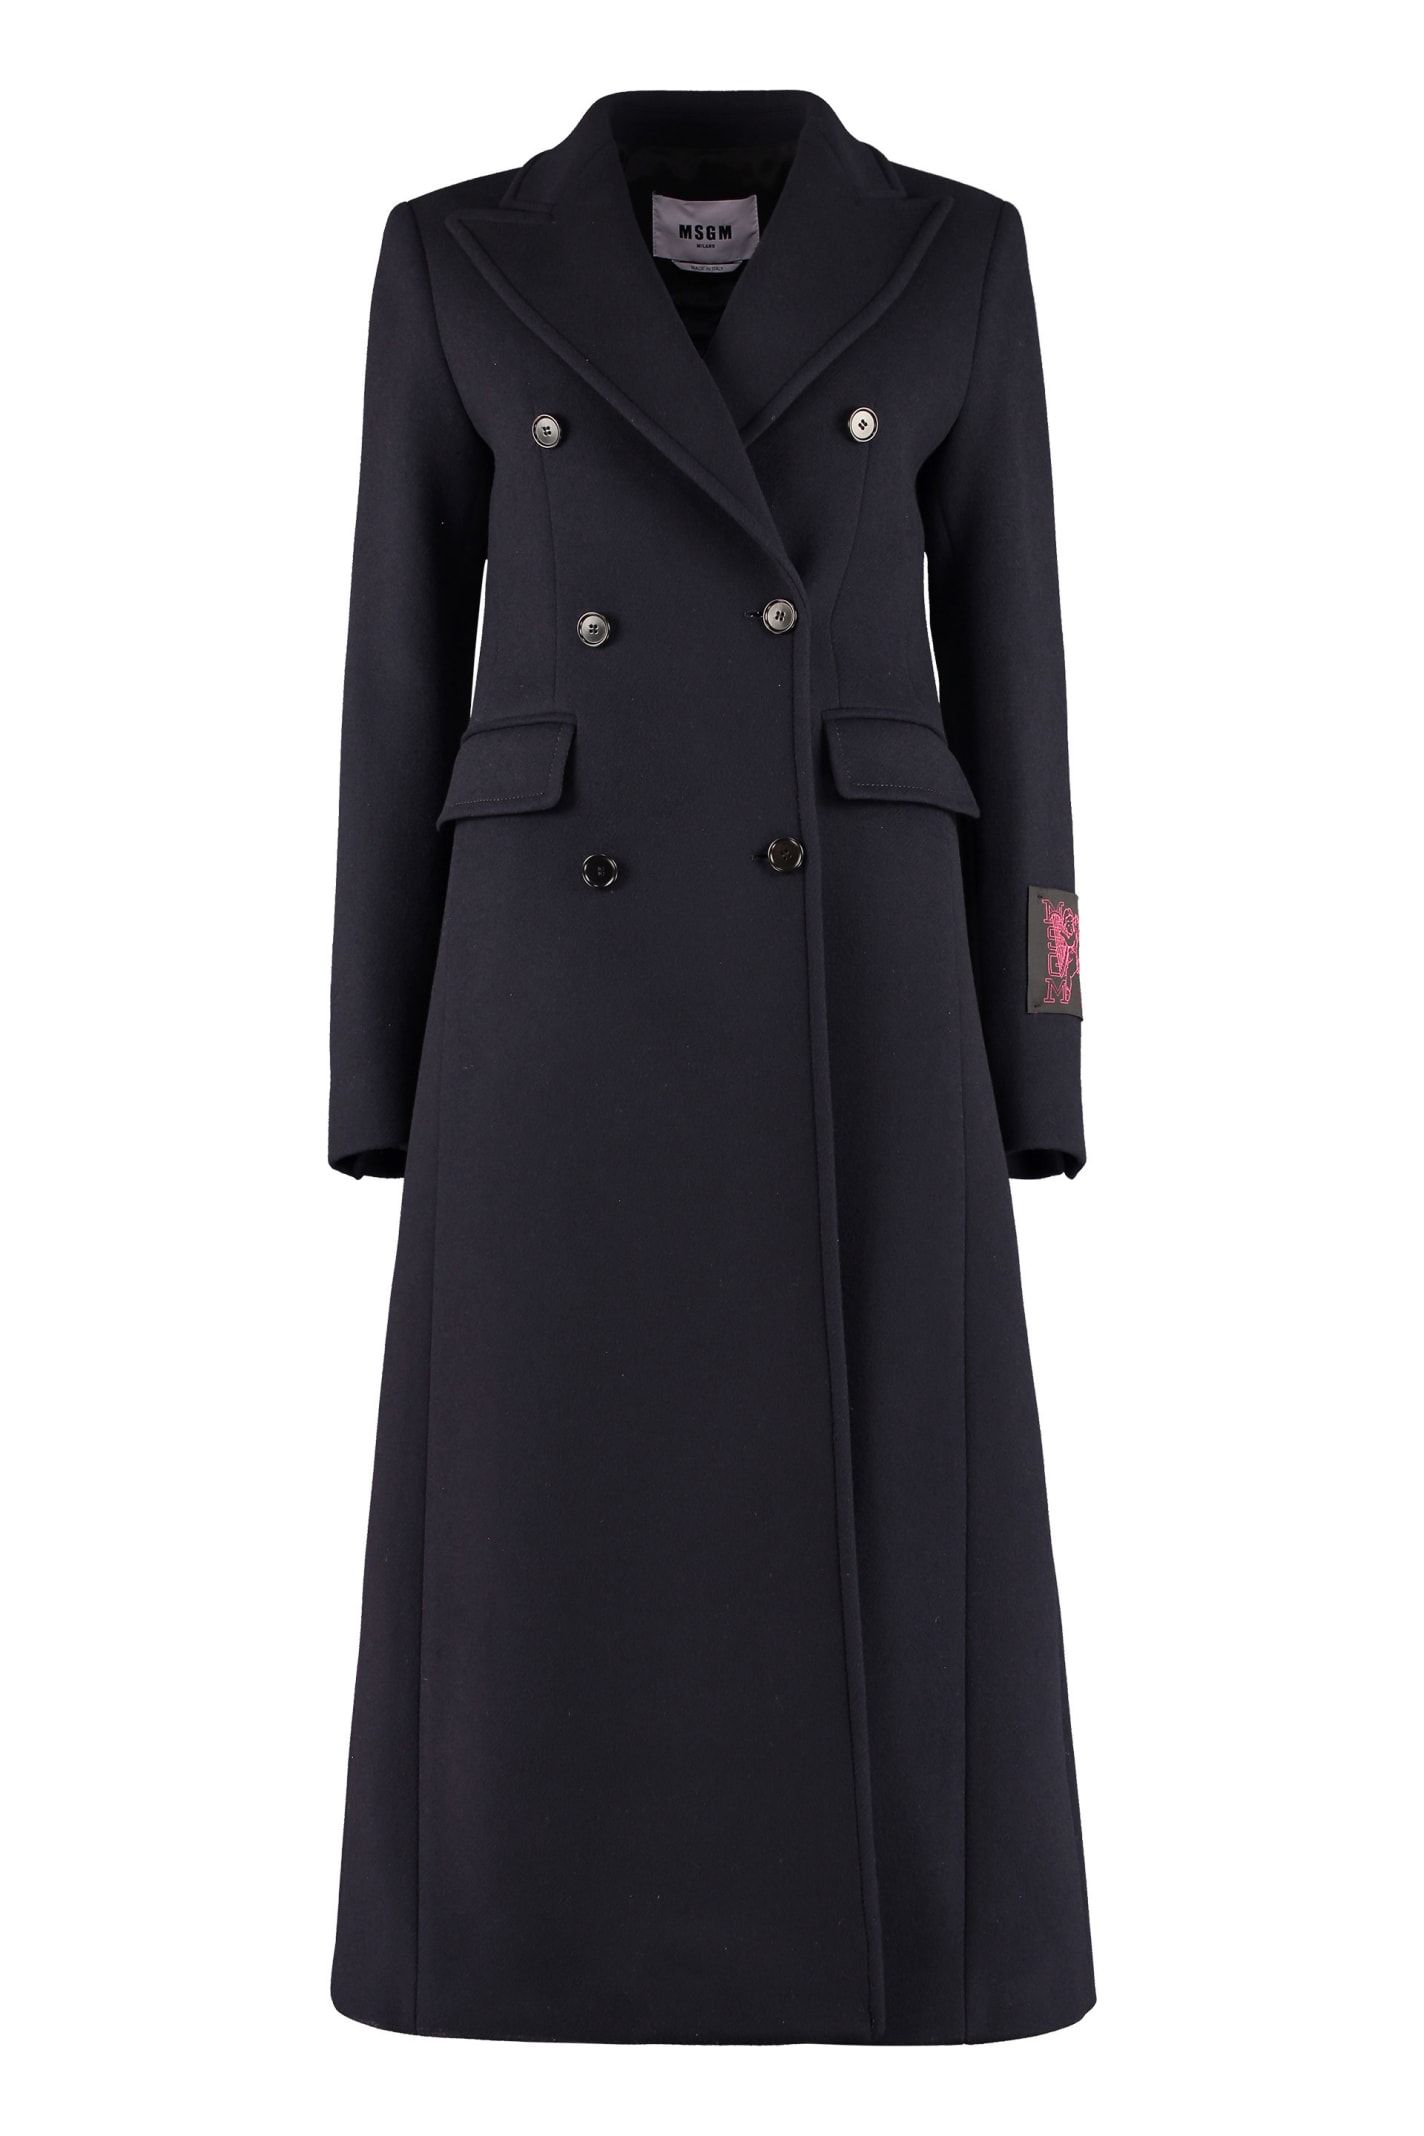 MSGM Wool Blend Double-breasted Coat